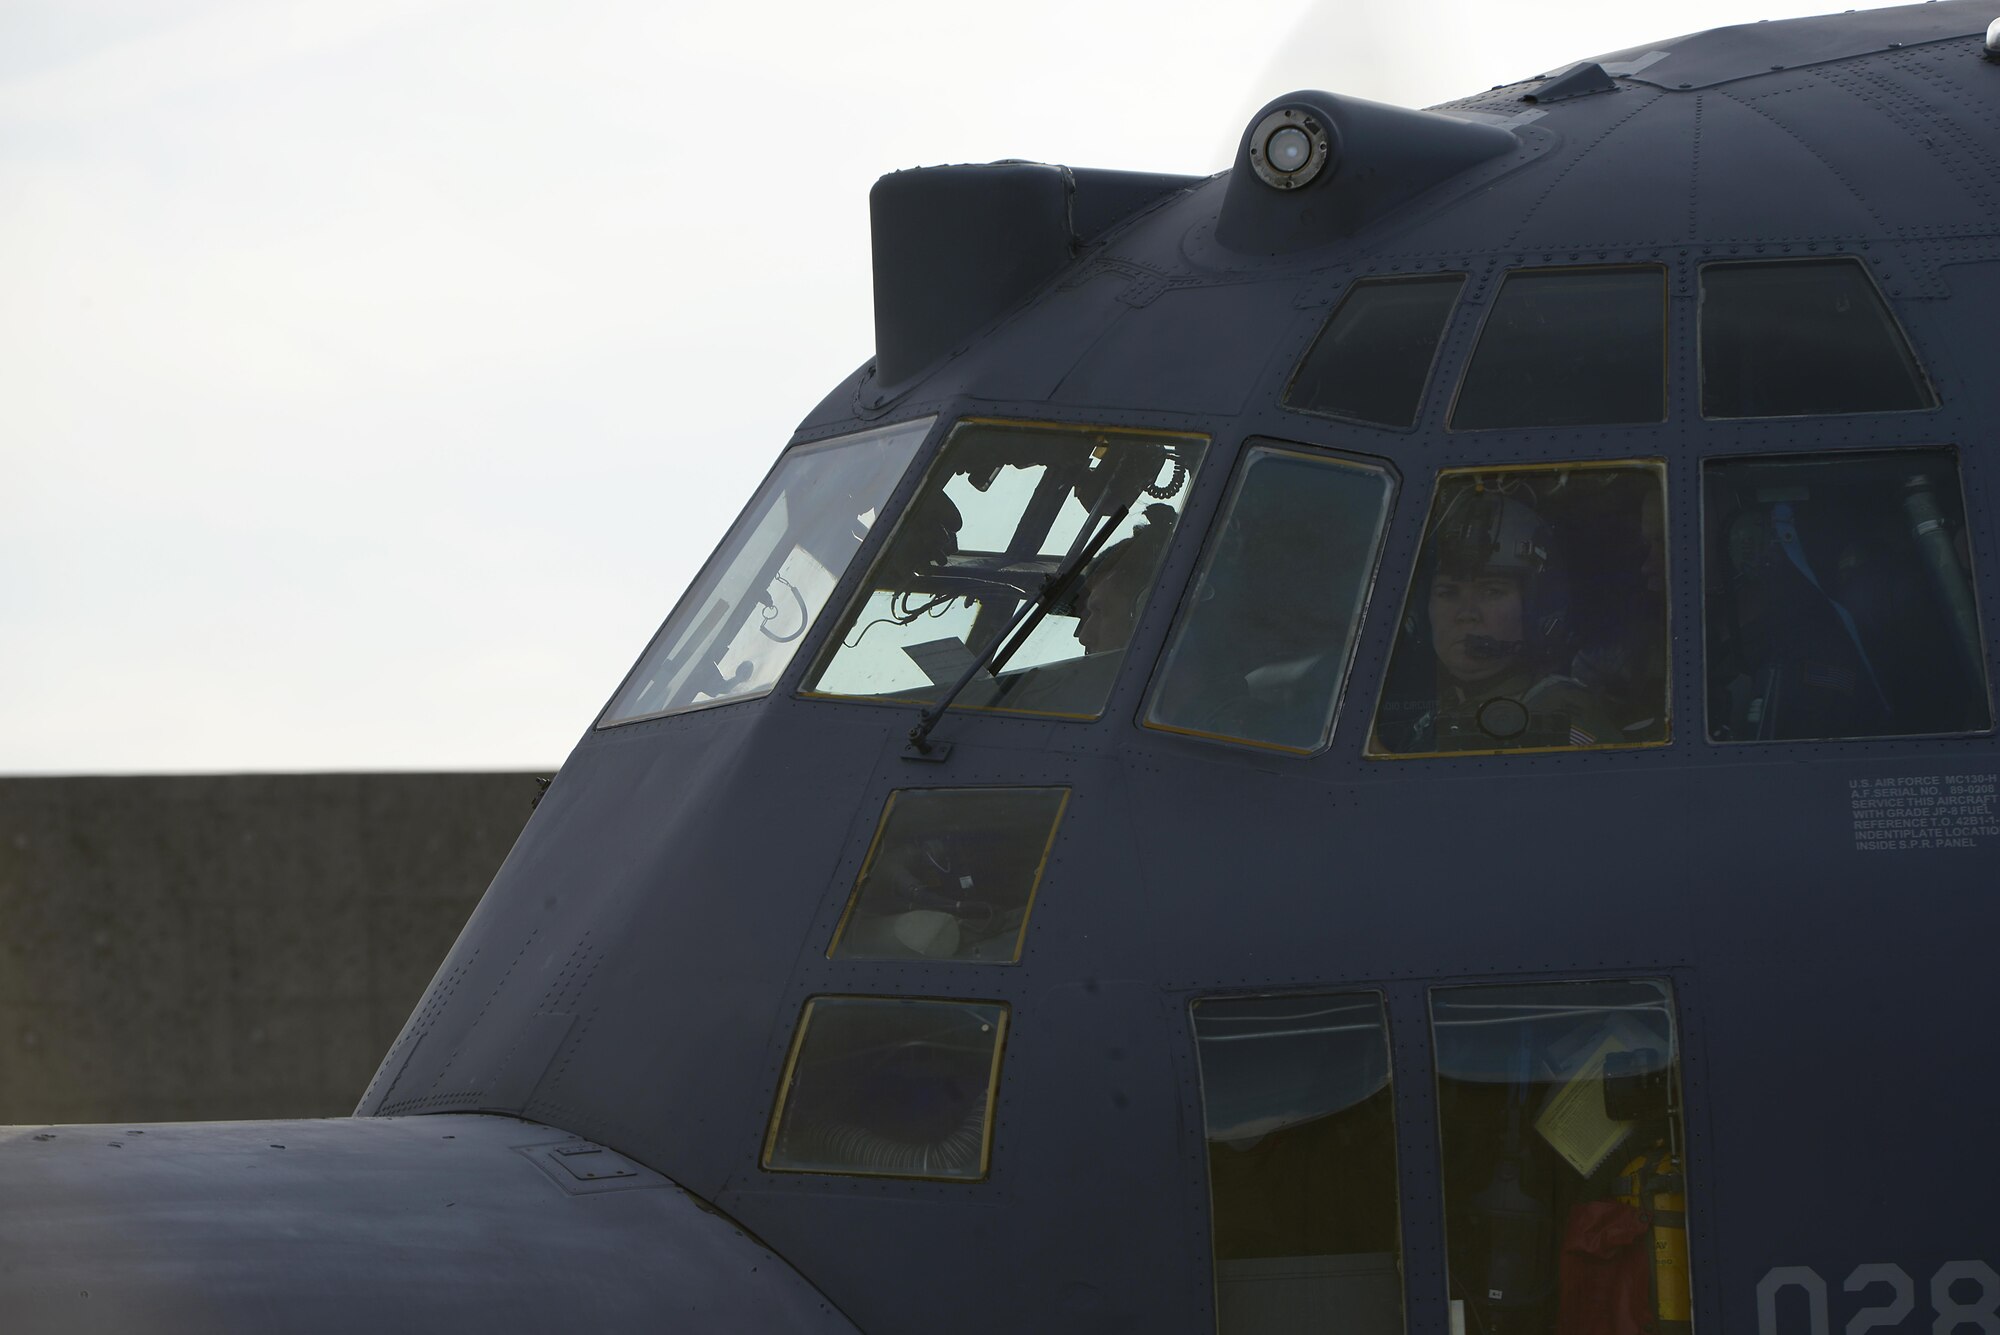 U.S. Air Force Capt. Valerie Knight, an MC-130H Combat Talon II pilot from the 1st Special Operations Squadron looks out her window before takeoff for a formation flight on Kadena Air Base, Japan, May 14, 2015. The 1st Special Operations Squadron is one of five squadrons that make up the 353rd Special Operations Group.  As the only Air Force special operations group in the Pacific, they are the focal point for Air Force special operations activities throughout the United States Pacific Command Theater. (U.S. Air Force photo by Staff Sgt. Maeson L. Elleman)